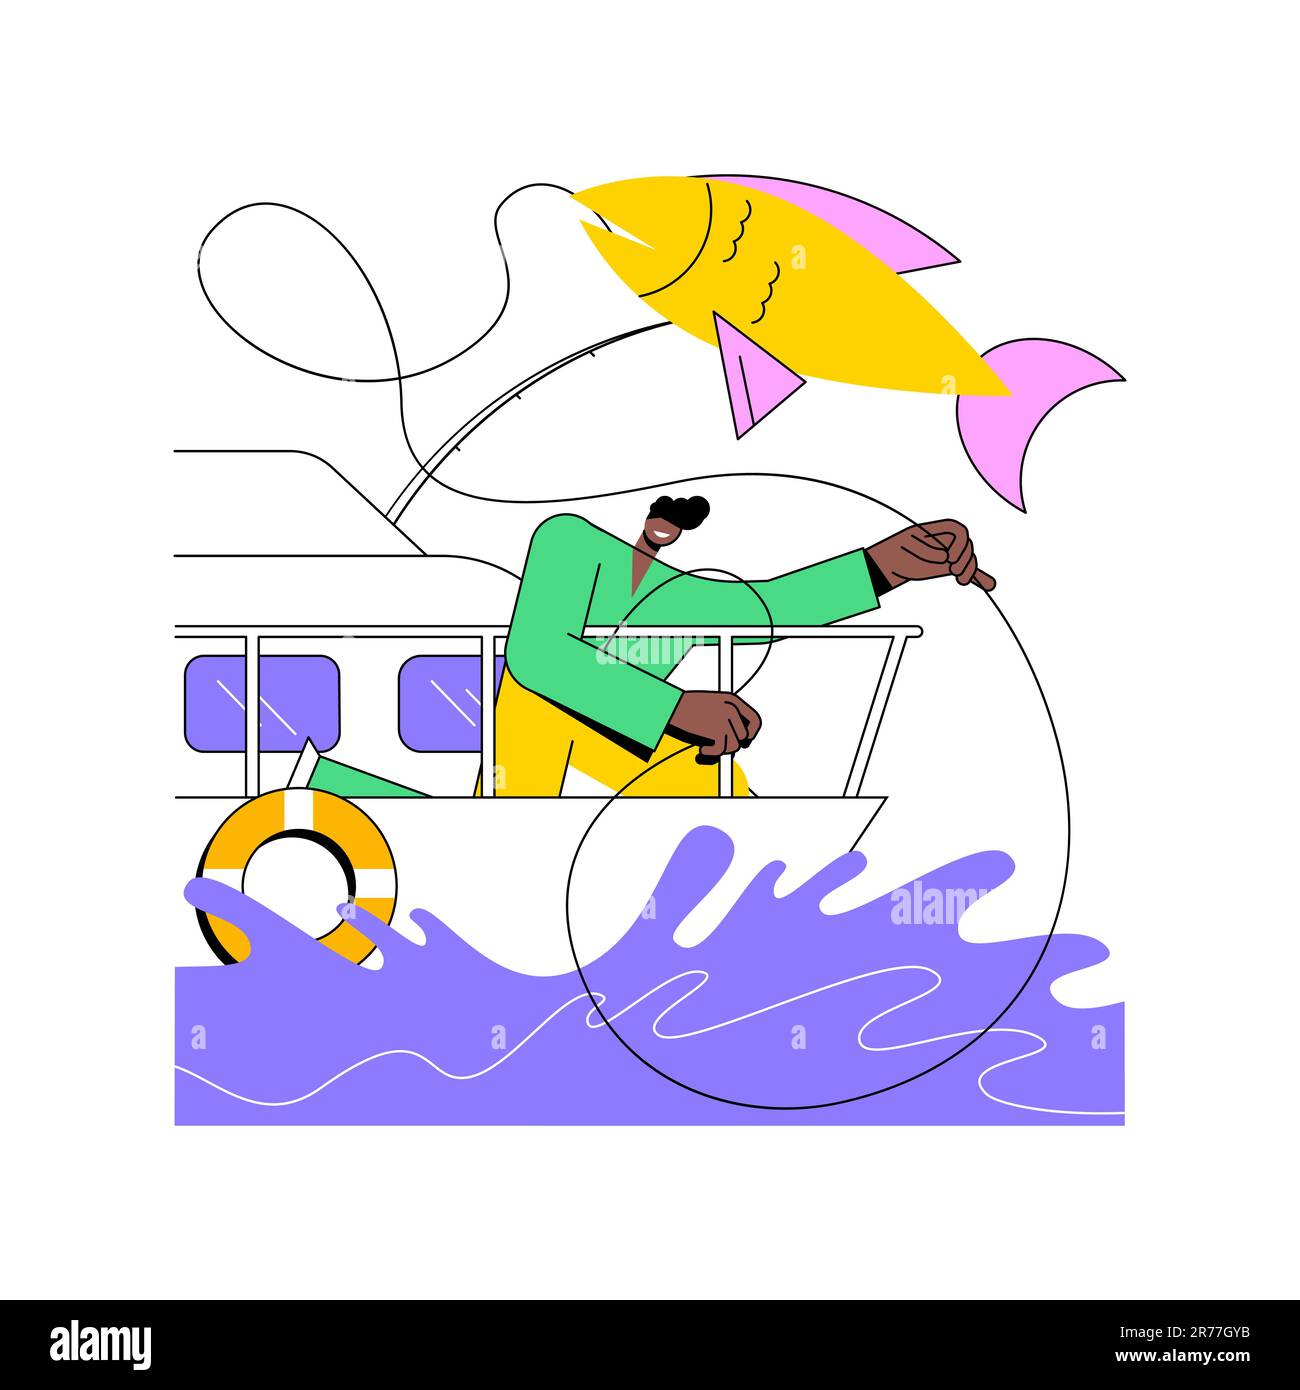 Man deep sea fishing from boat Stock Vector Images - Alamy